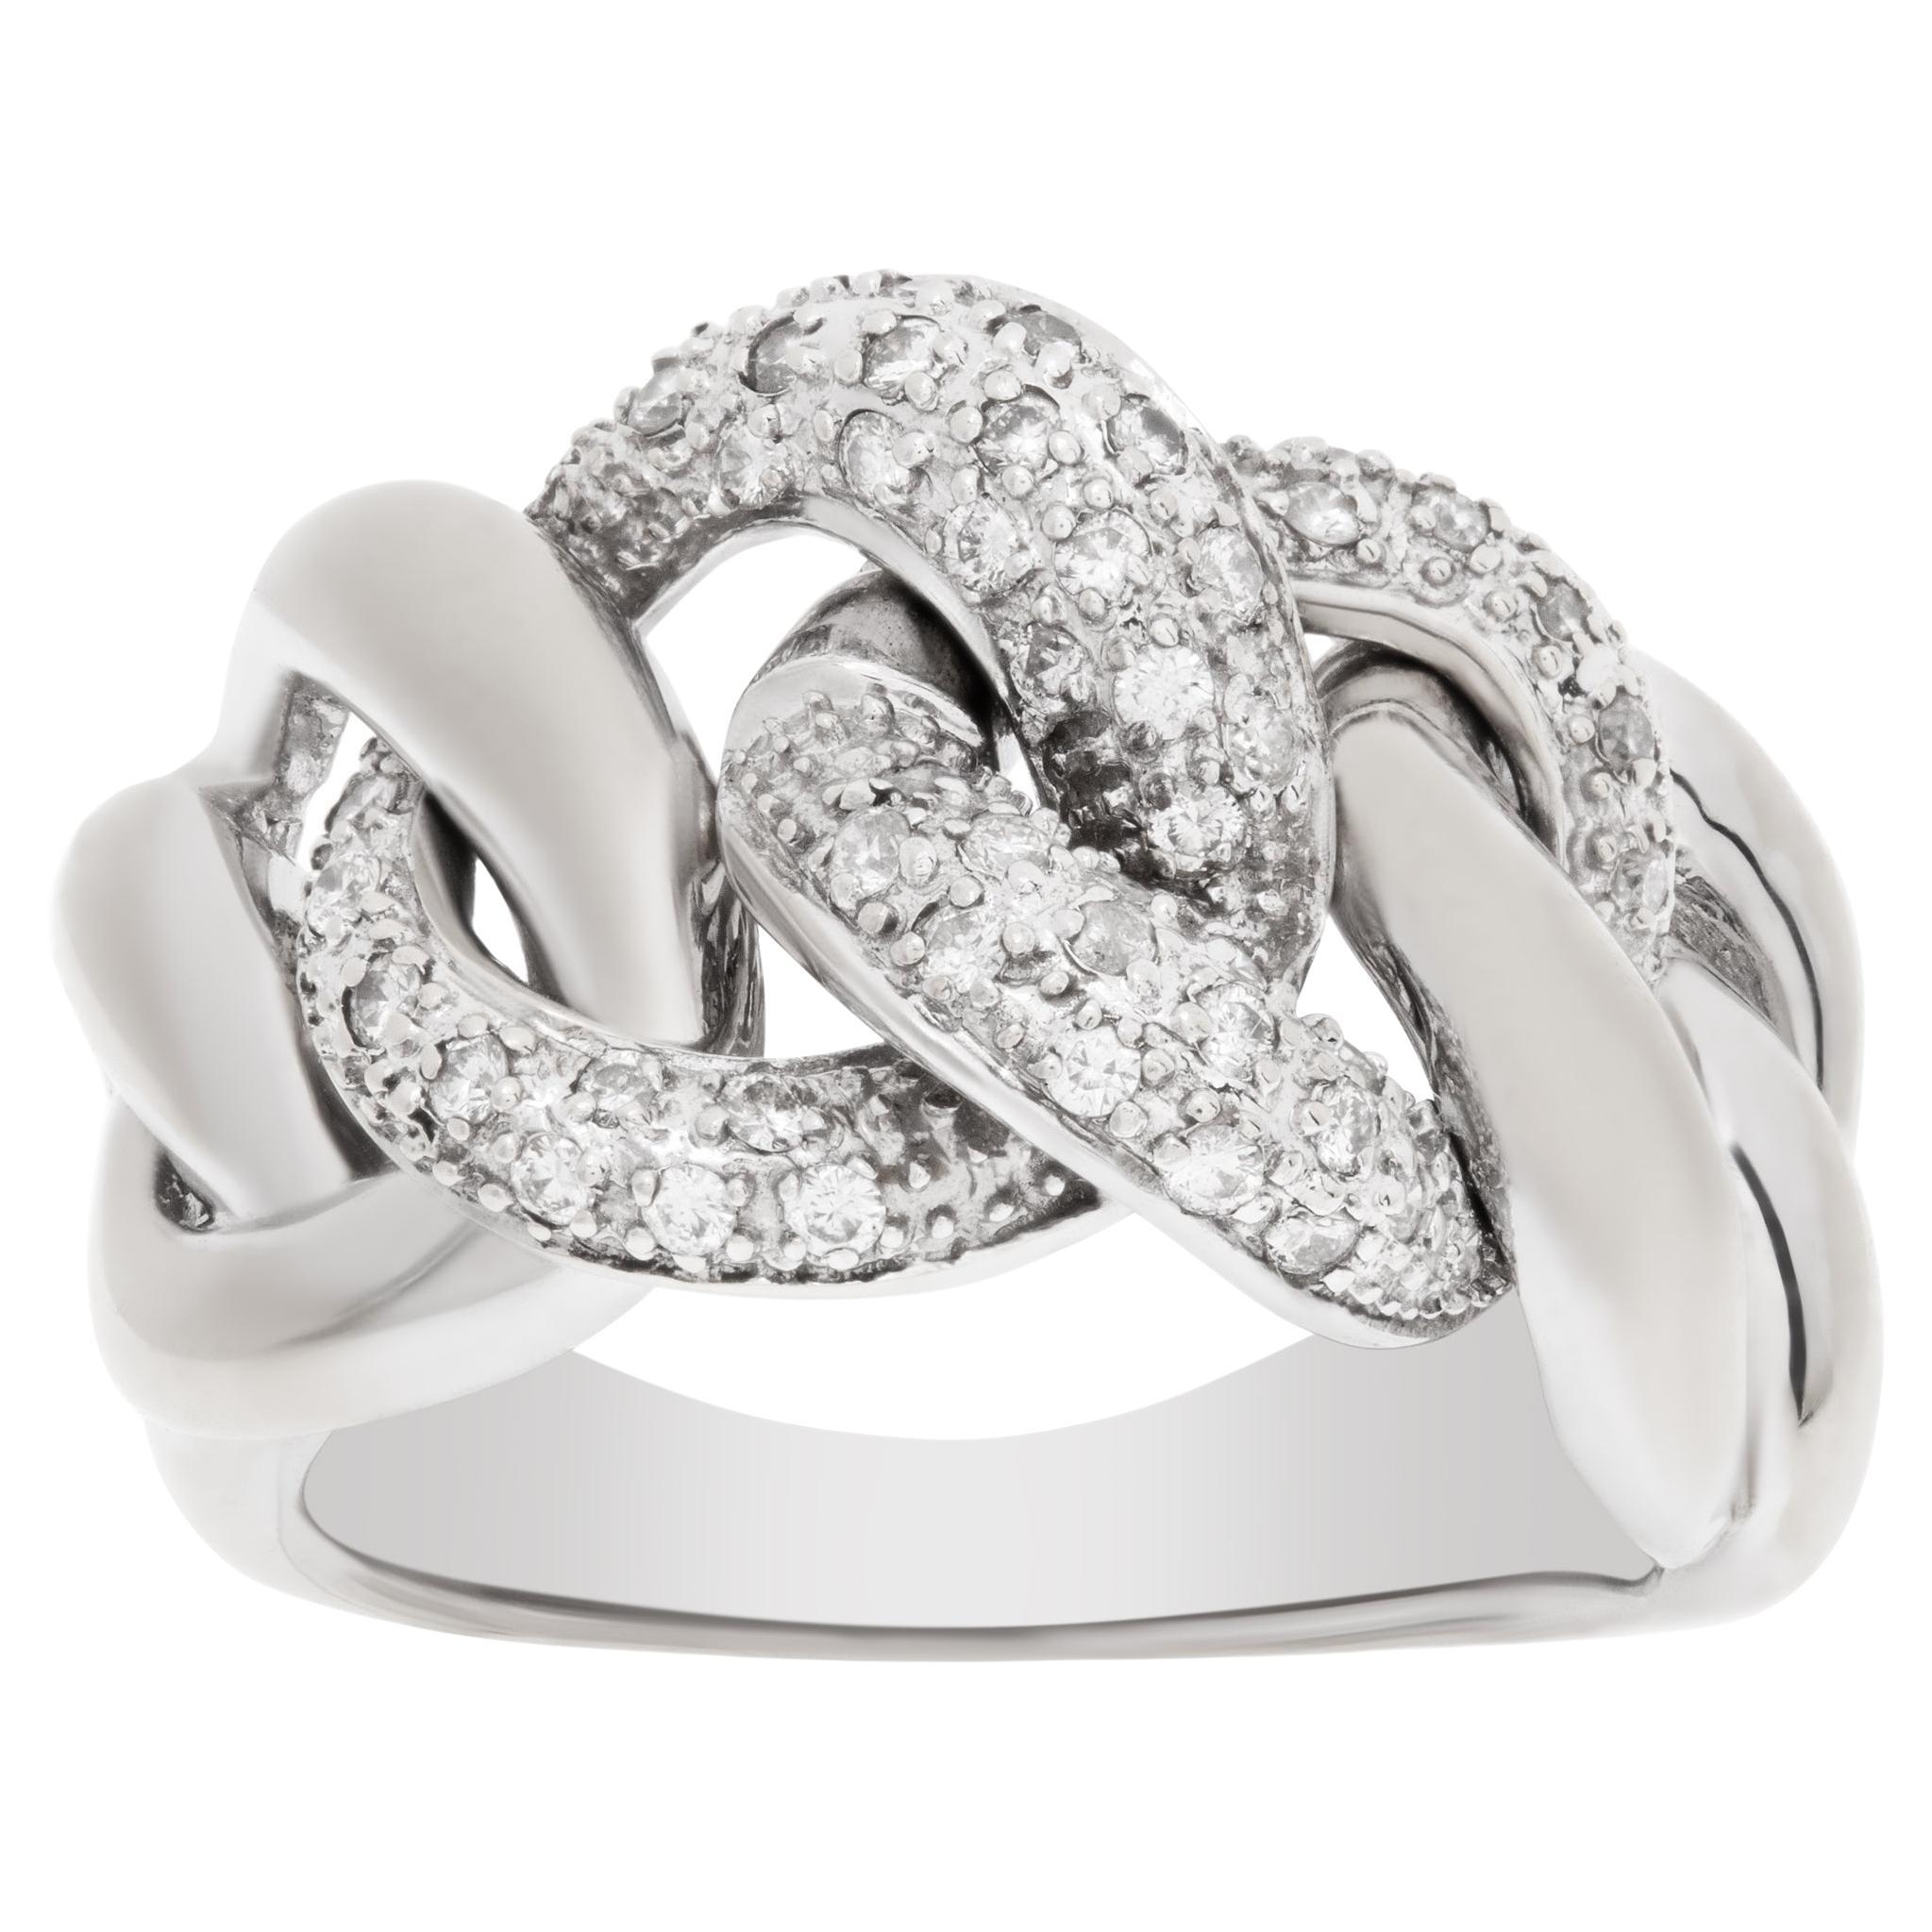 Pave Diamond link ring in 14k white gold. 0.50 carats in diamonds.  For Sale